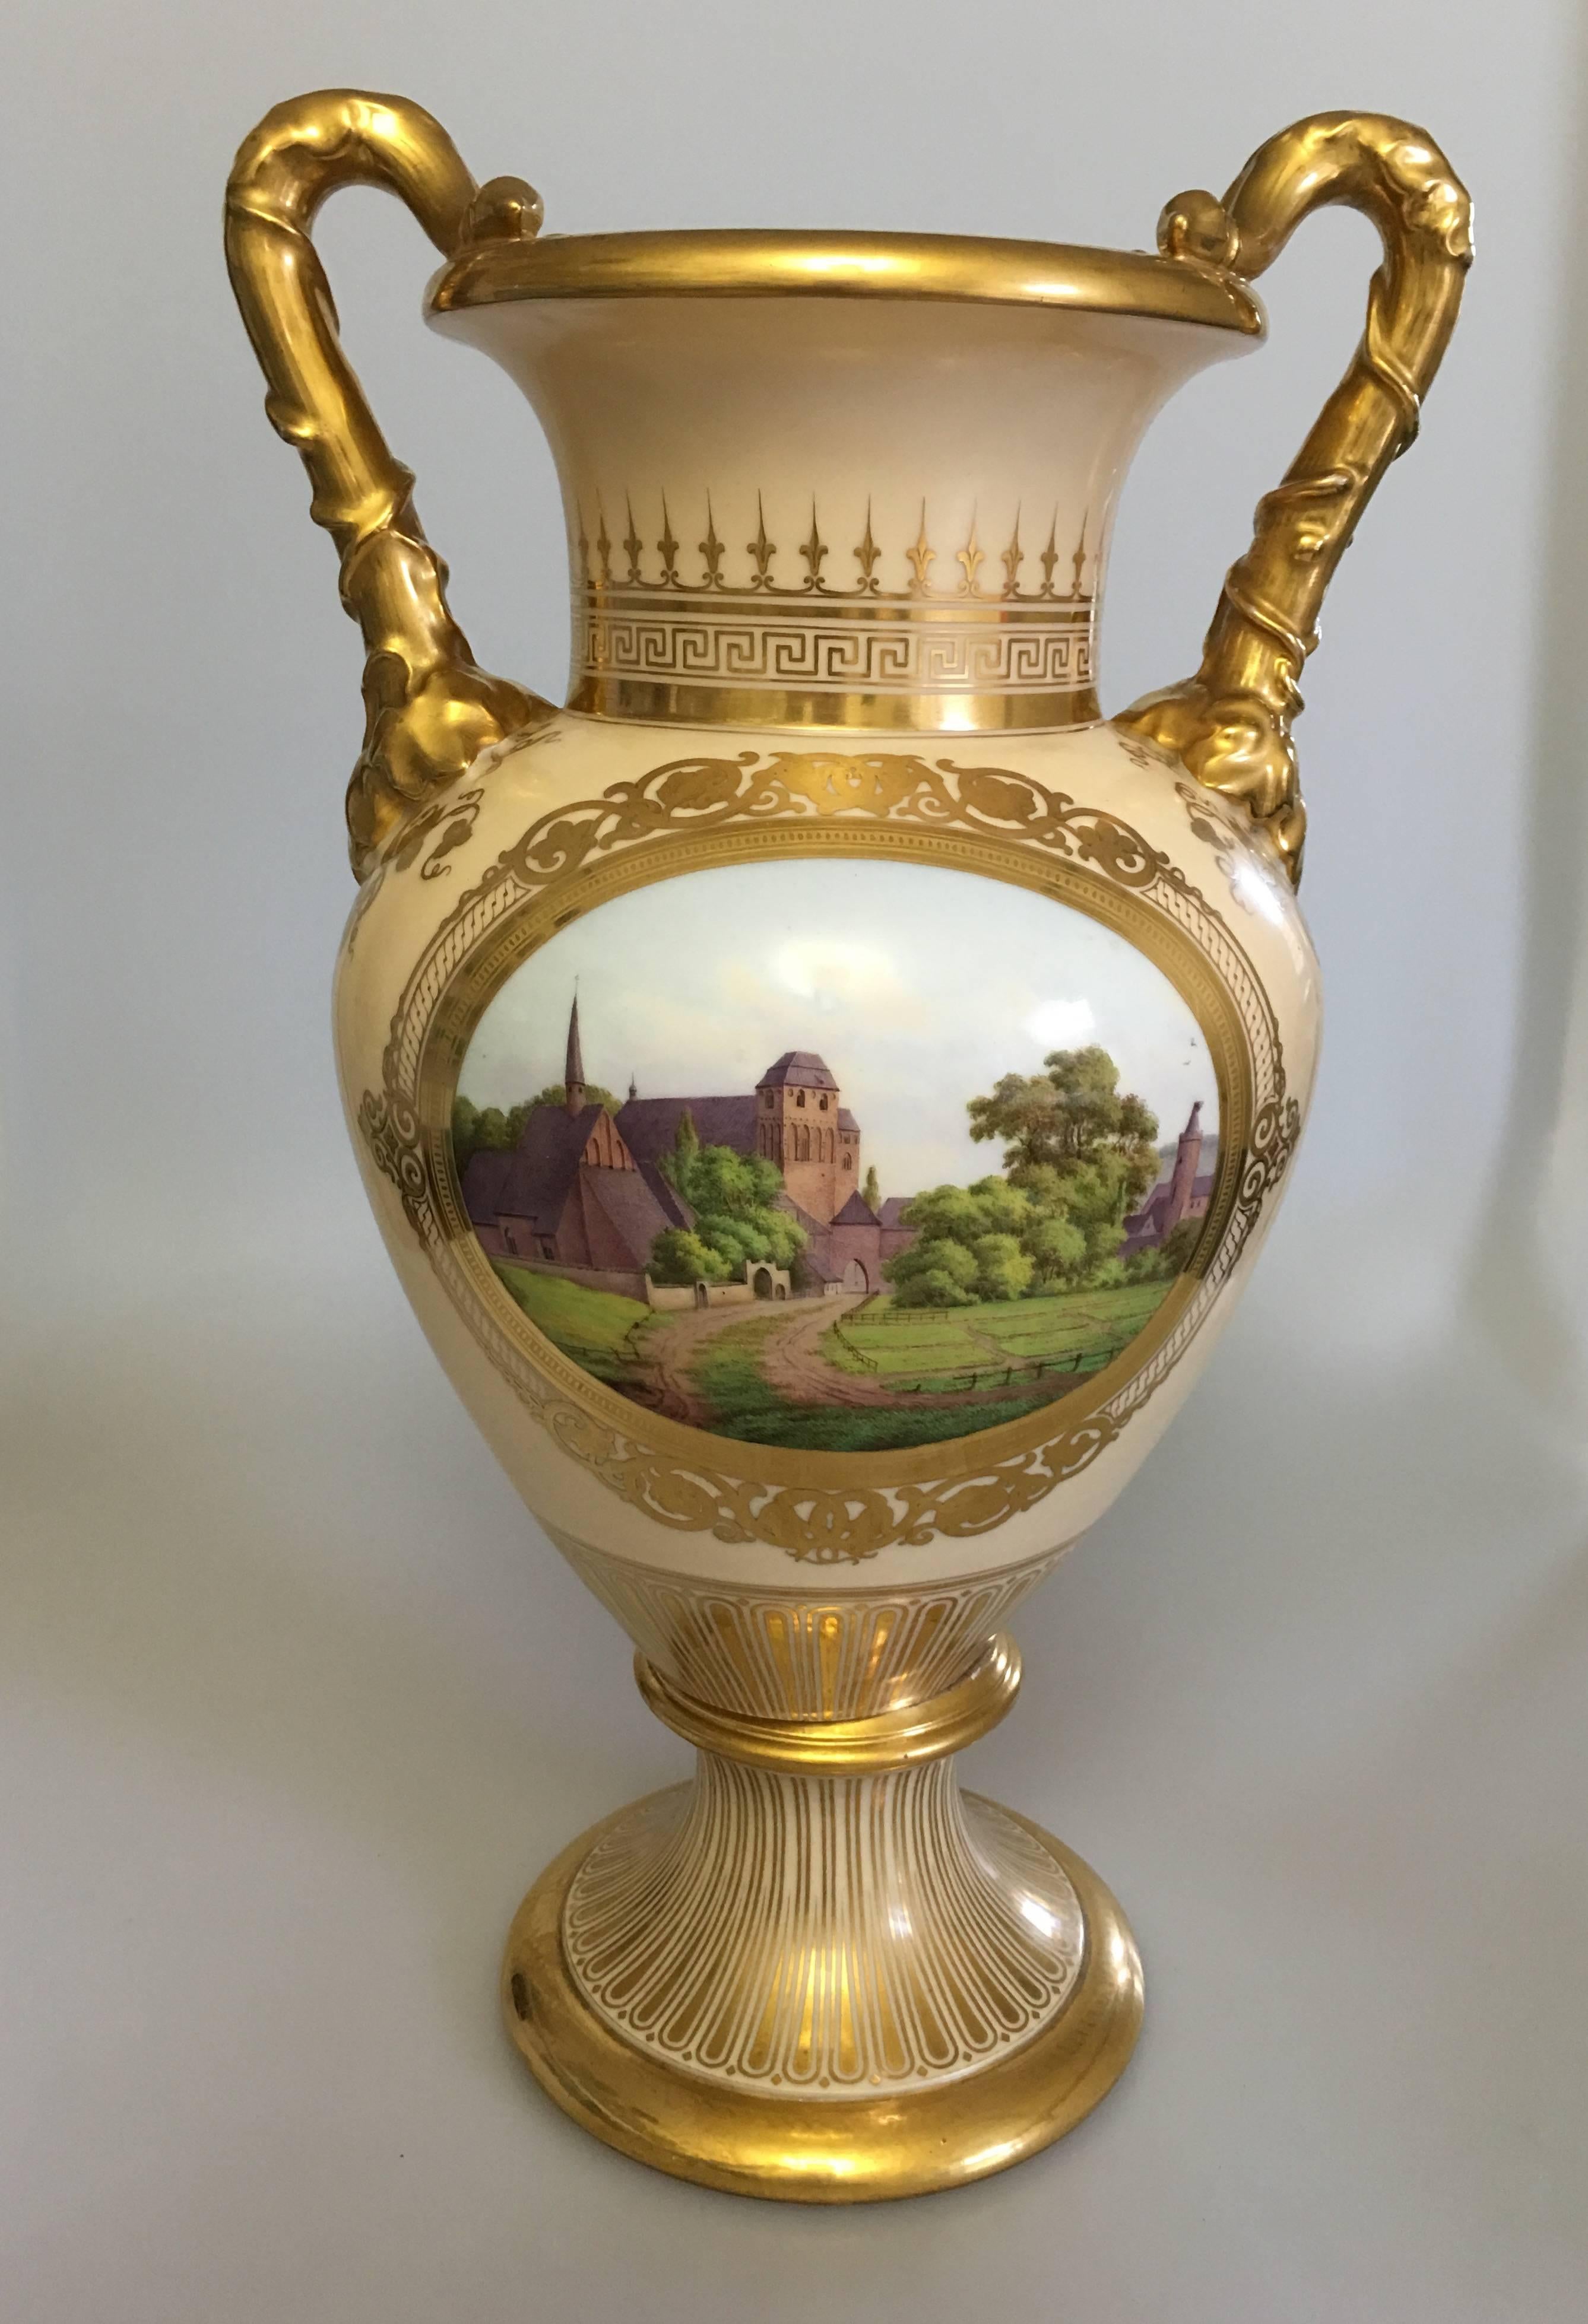 Neoclassical 19th Century Bing & Grondahl Ornamental Two-Handled Vase  For Sale